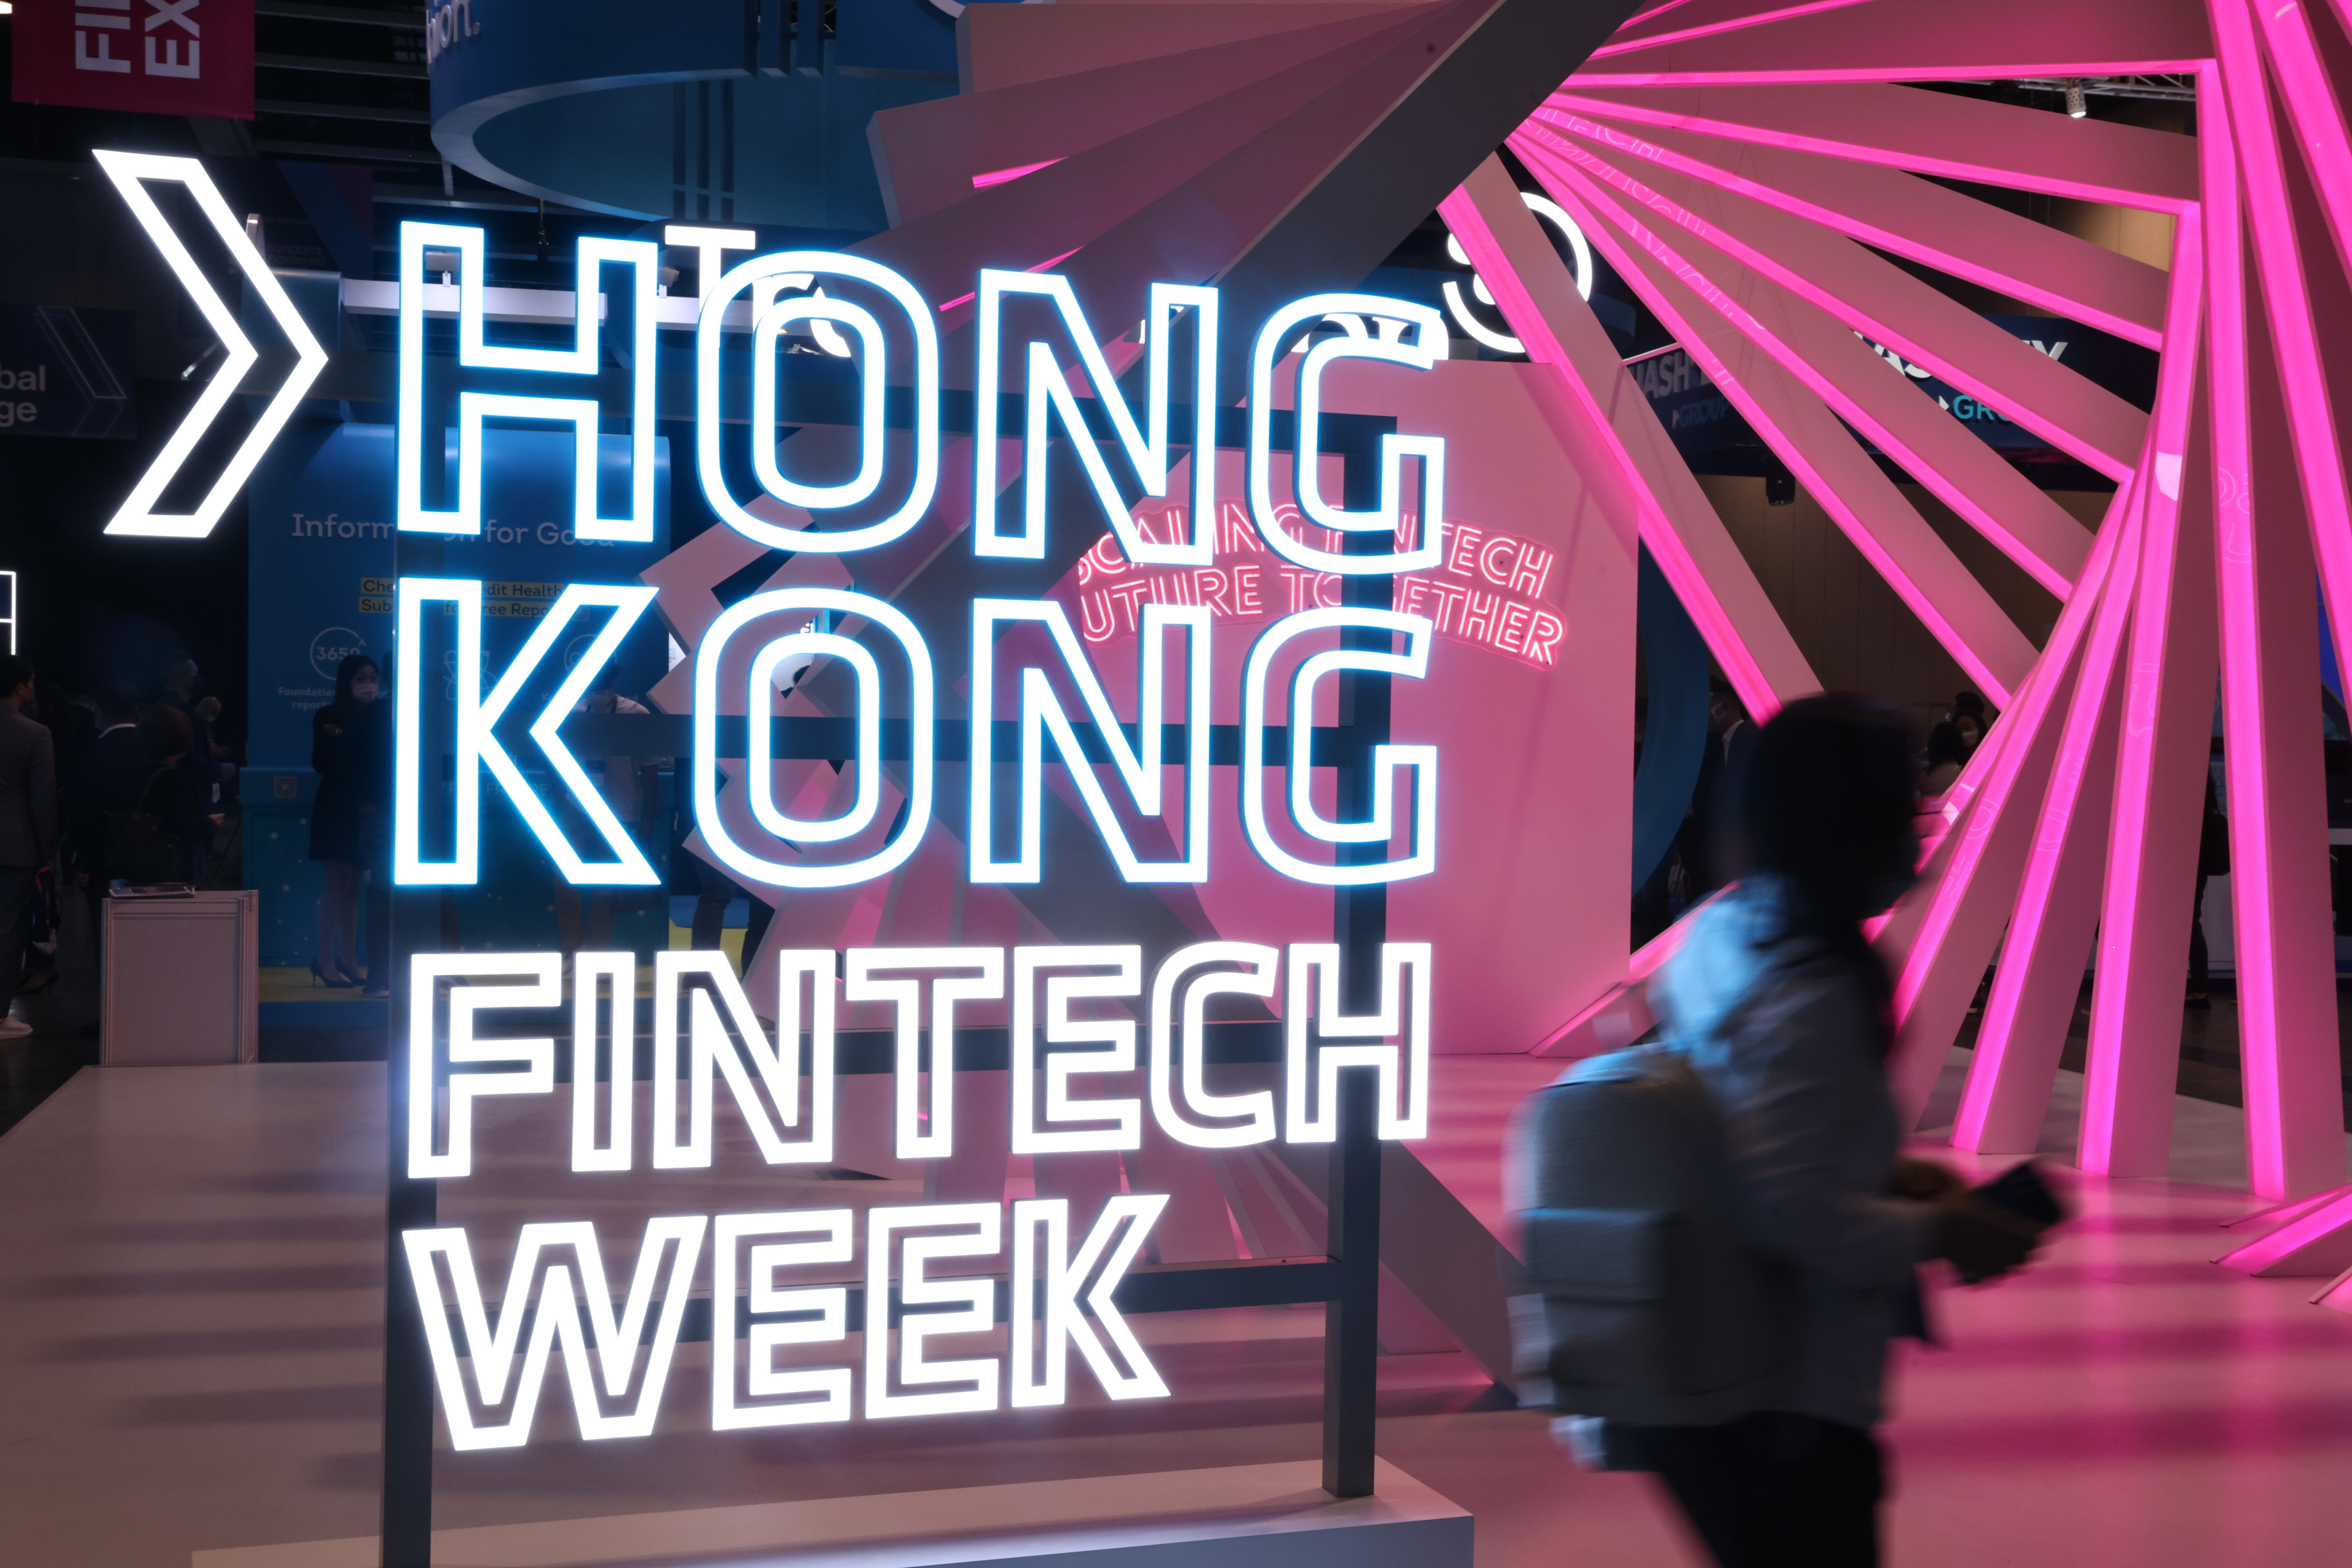 Hong Kong’s annual FinTech Week event is expected to bring good news for crypto investors this year with a relaxation on rules regarding retail trading. Photo: SCMP/ K. Y. Cheng